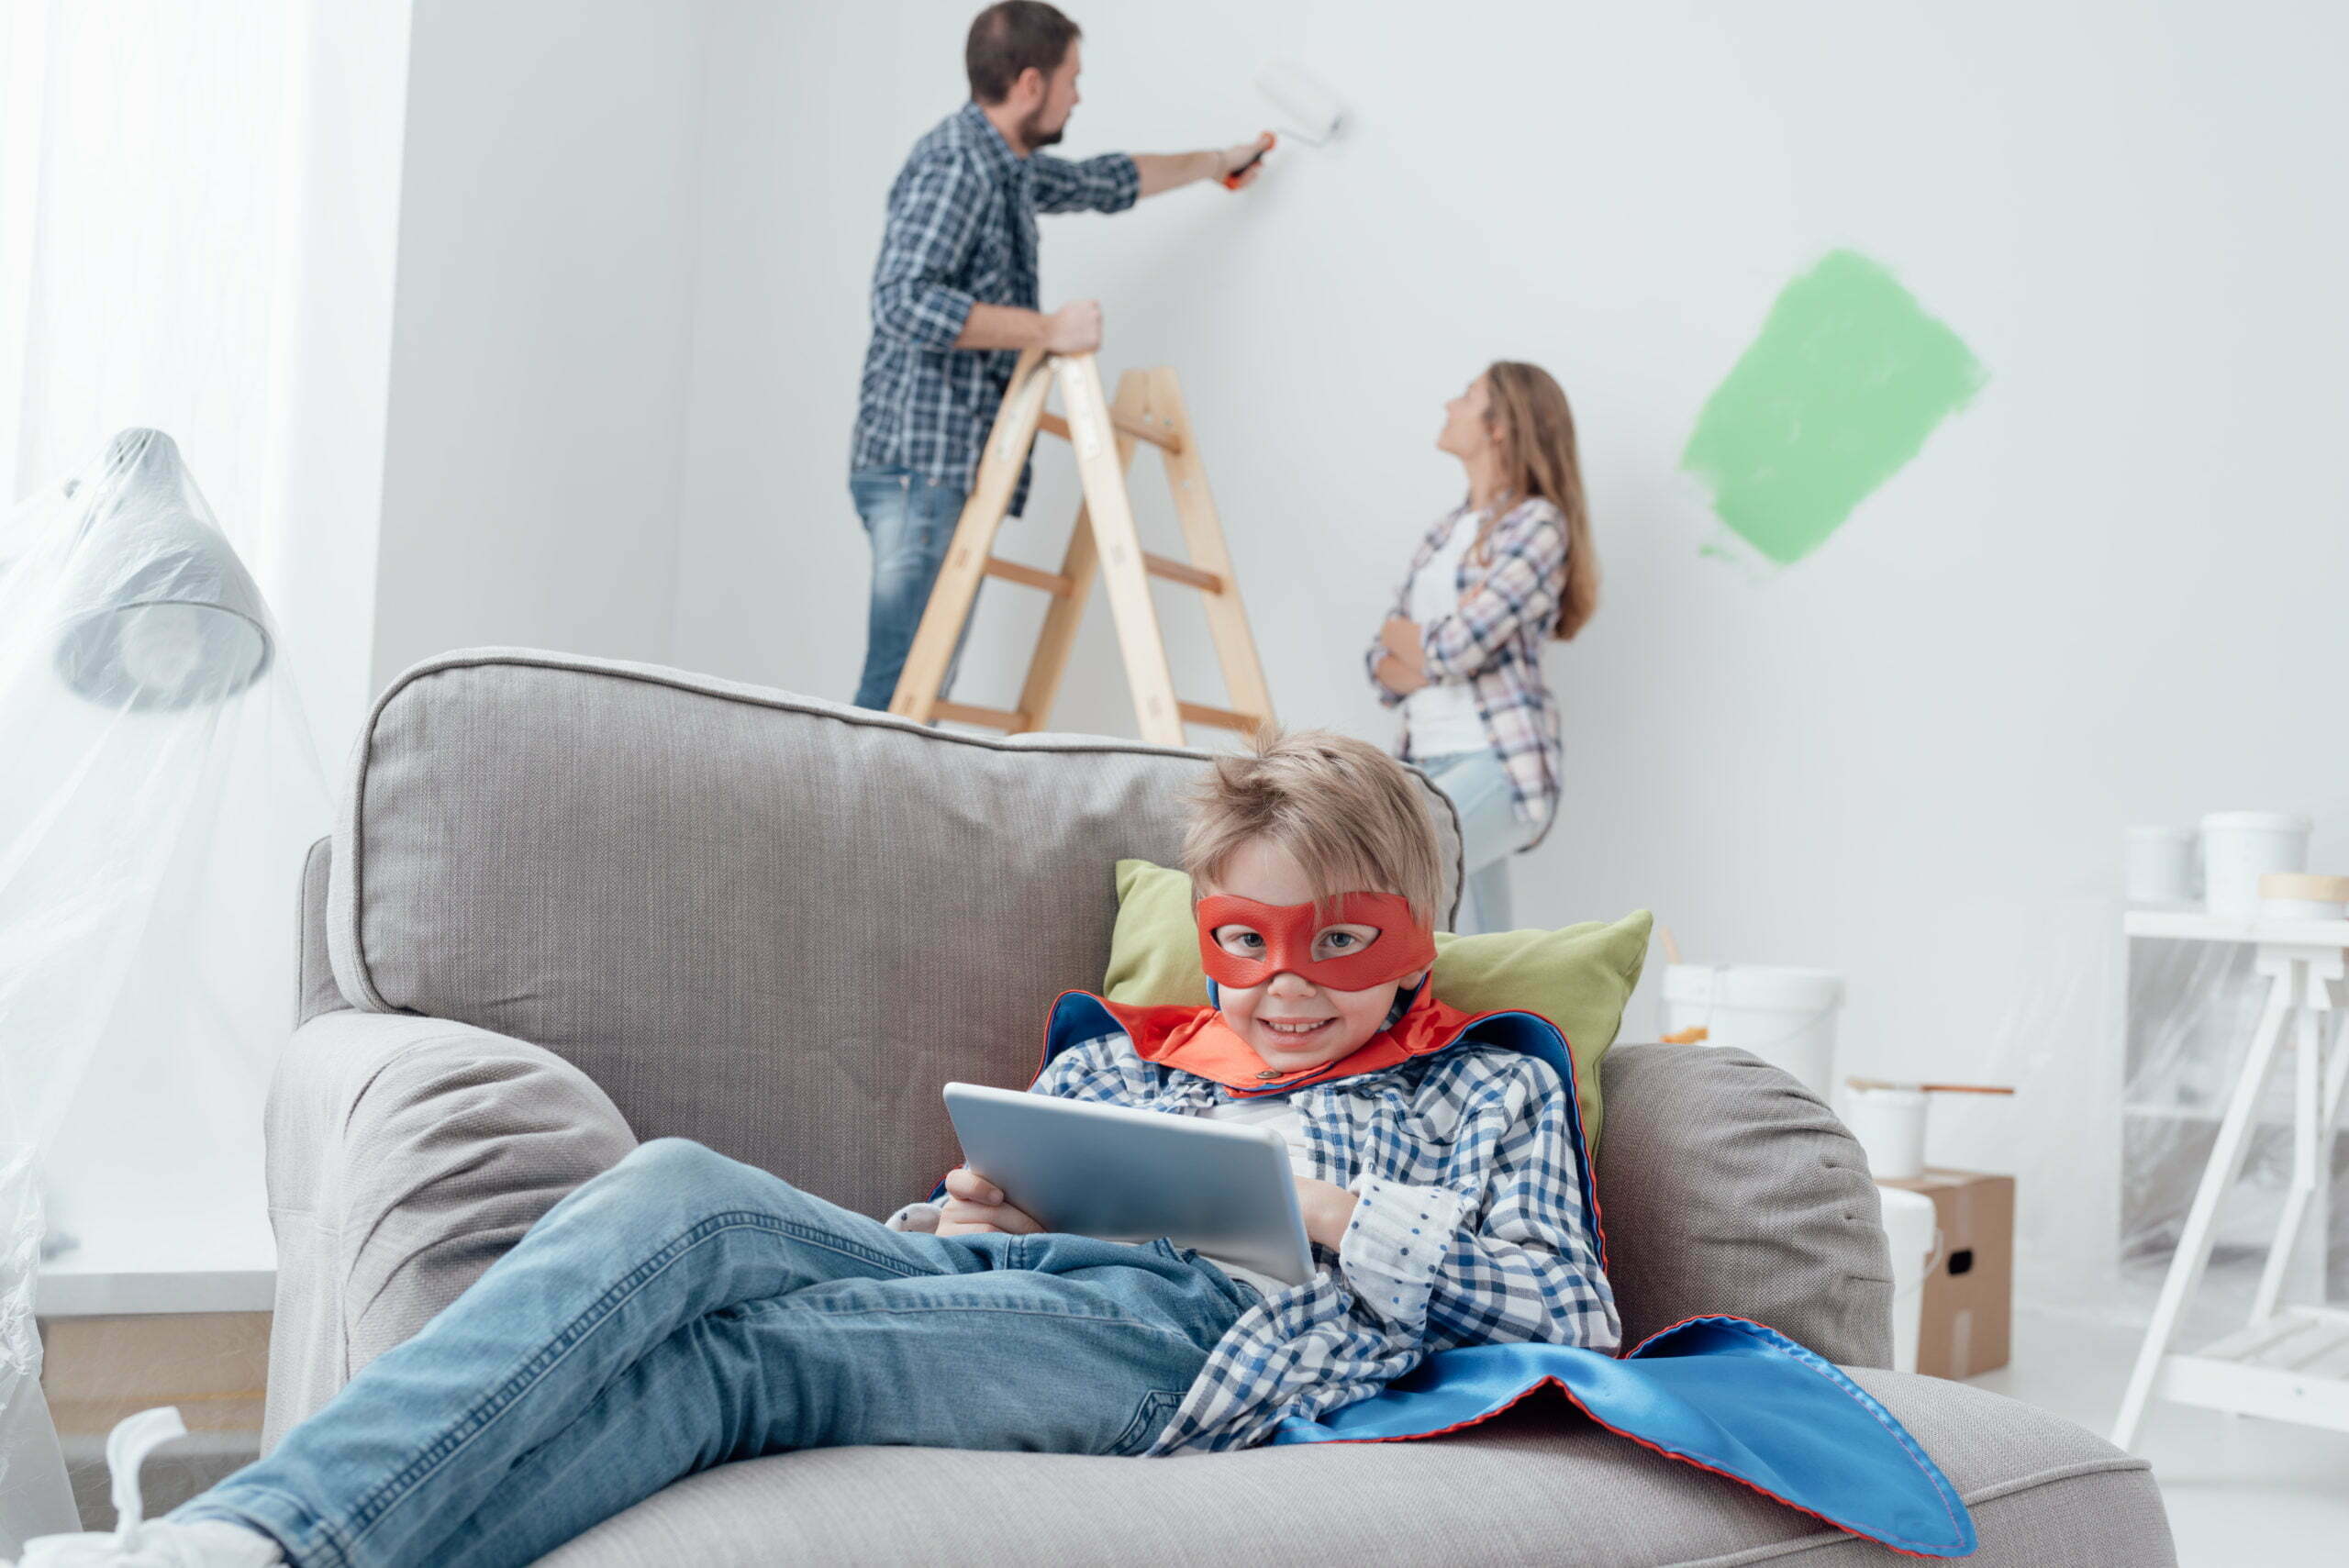 Superhero using a tablet and home makeover